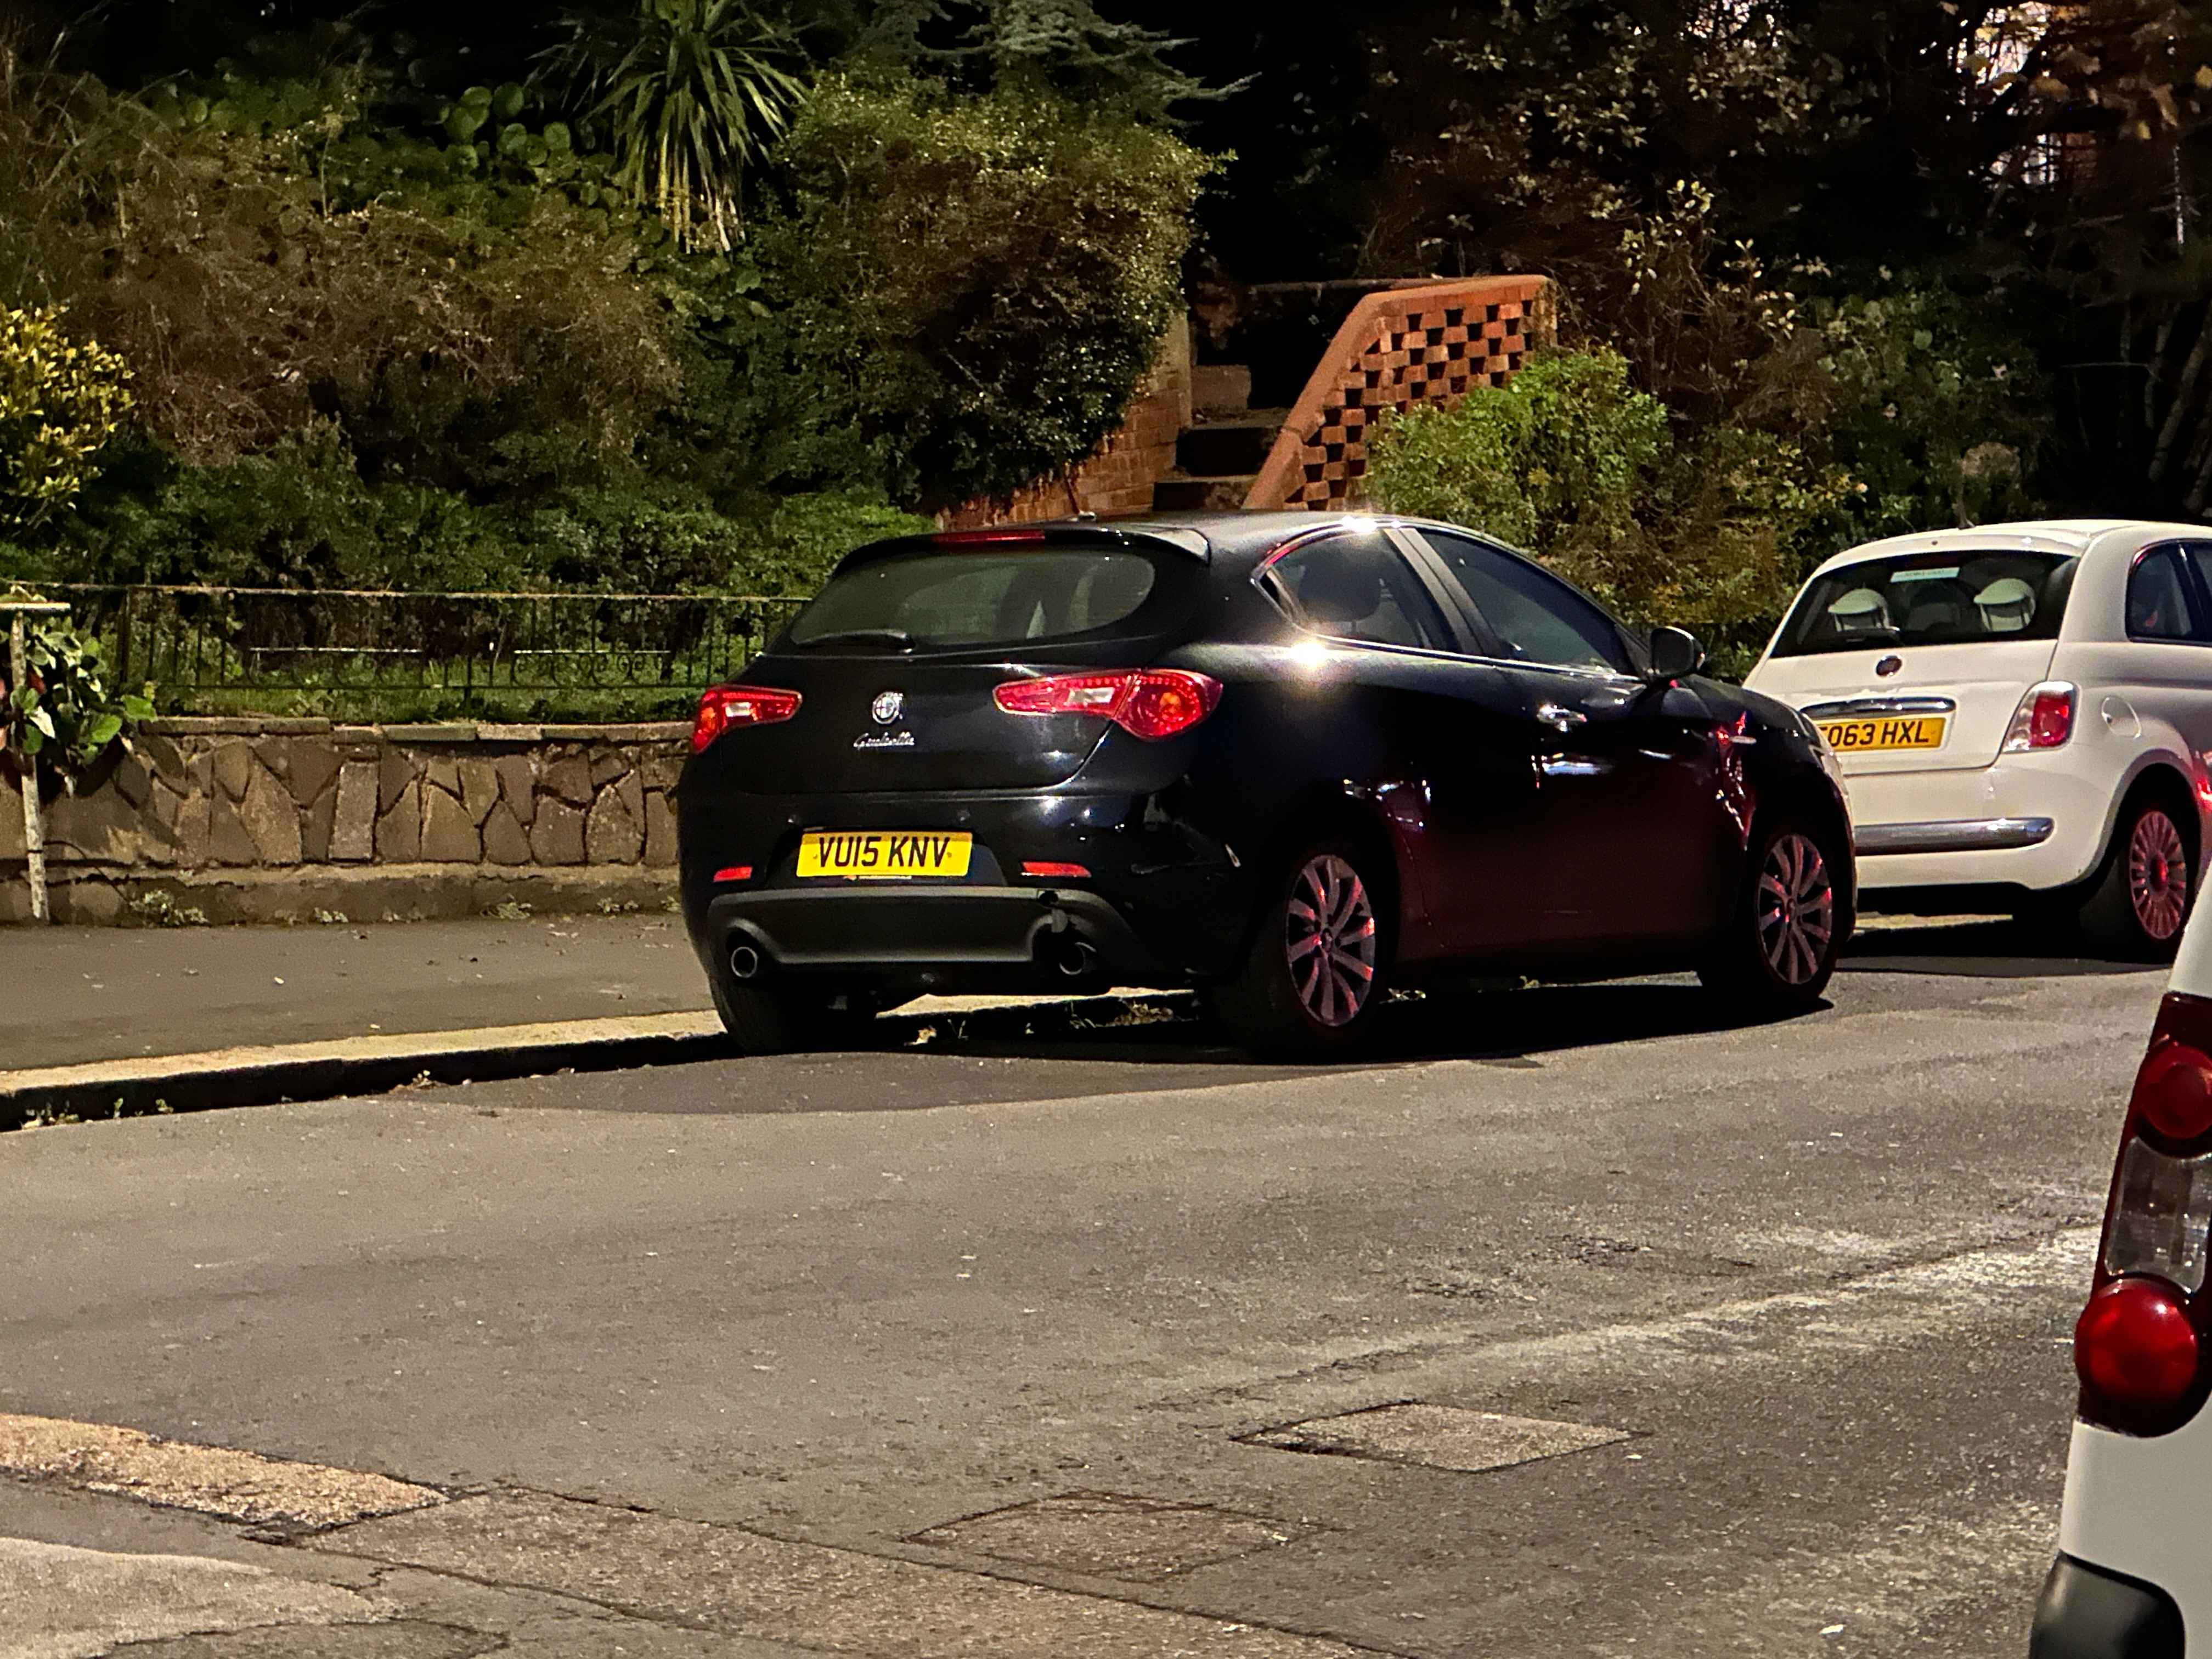 Photograph of VU15 KNV - a Black Alfa Romeo Giulietta parked in Hollingdean by a non-resident. The sixth of ten photographs supplied by the residents of Hollingdean.